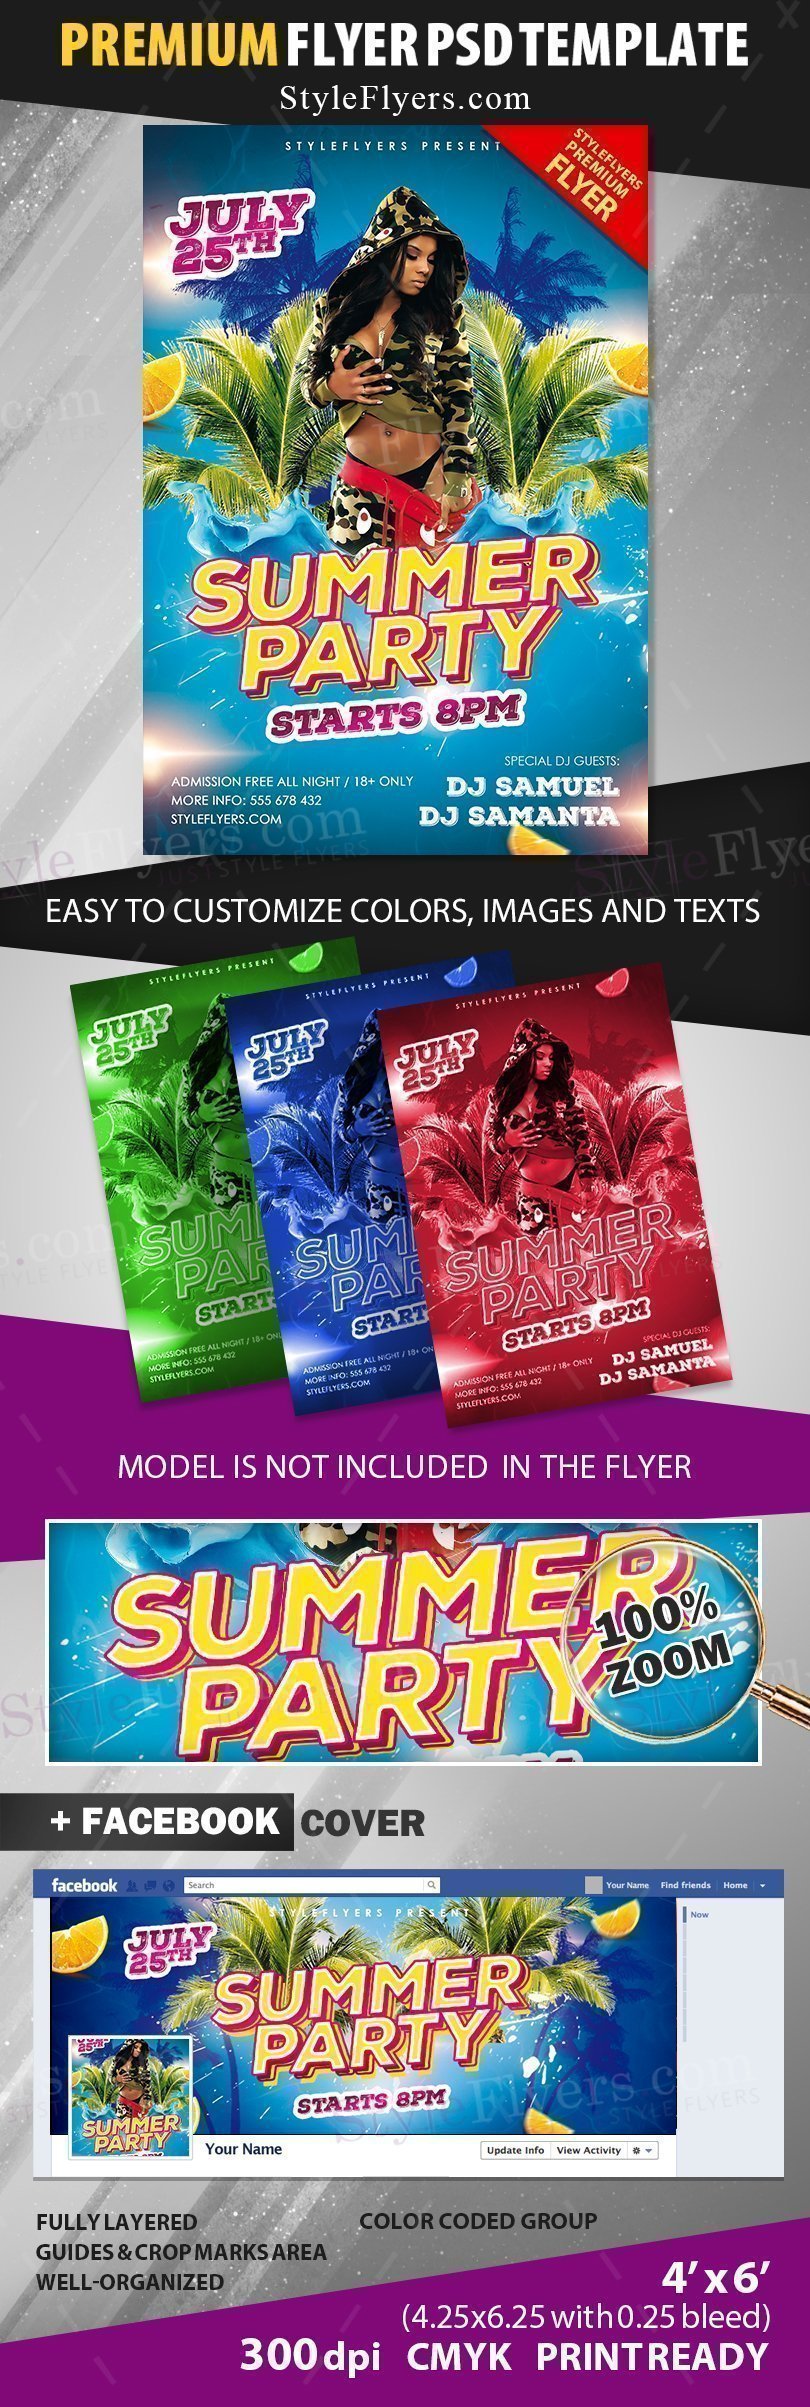 preview_summer party_psd_flyer